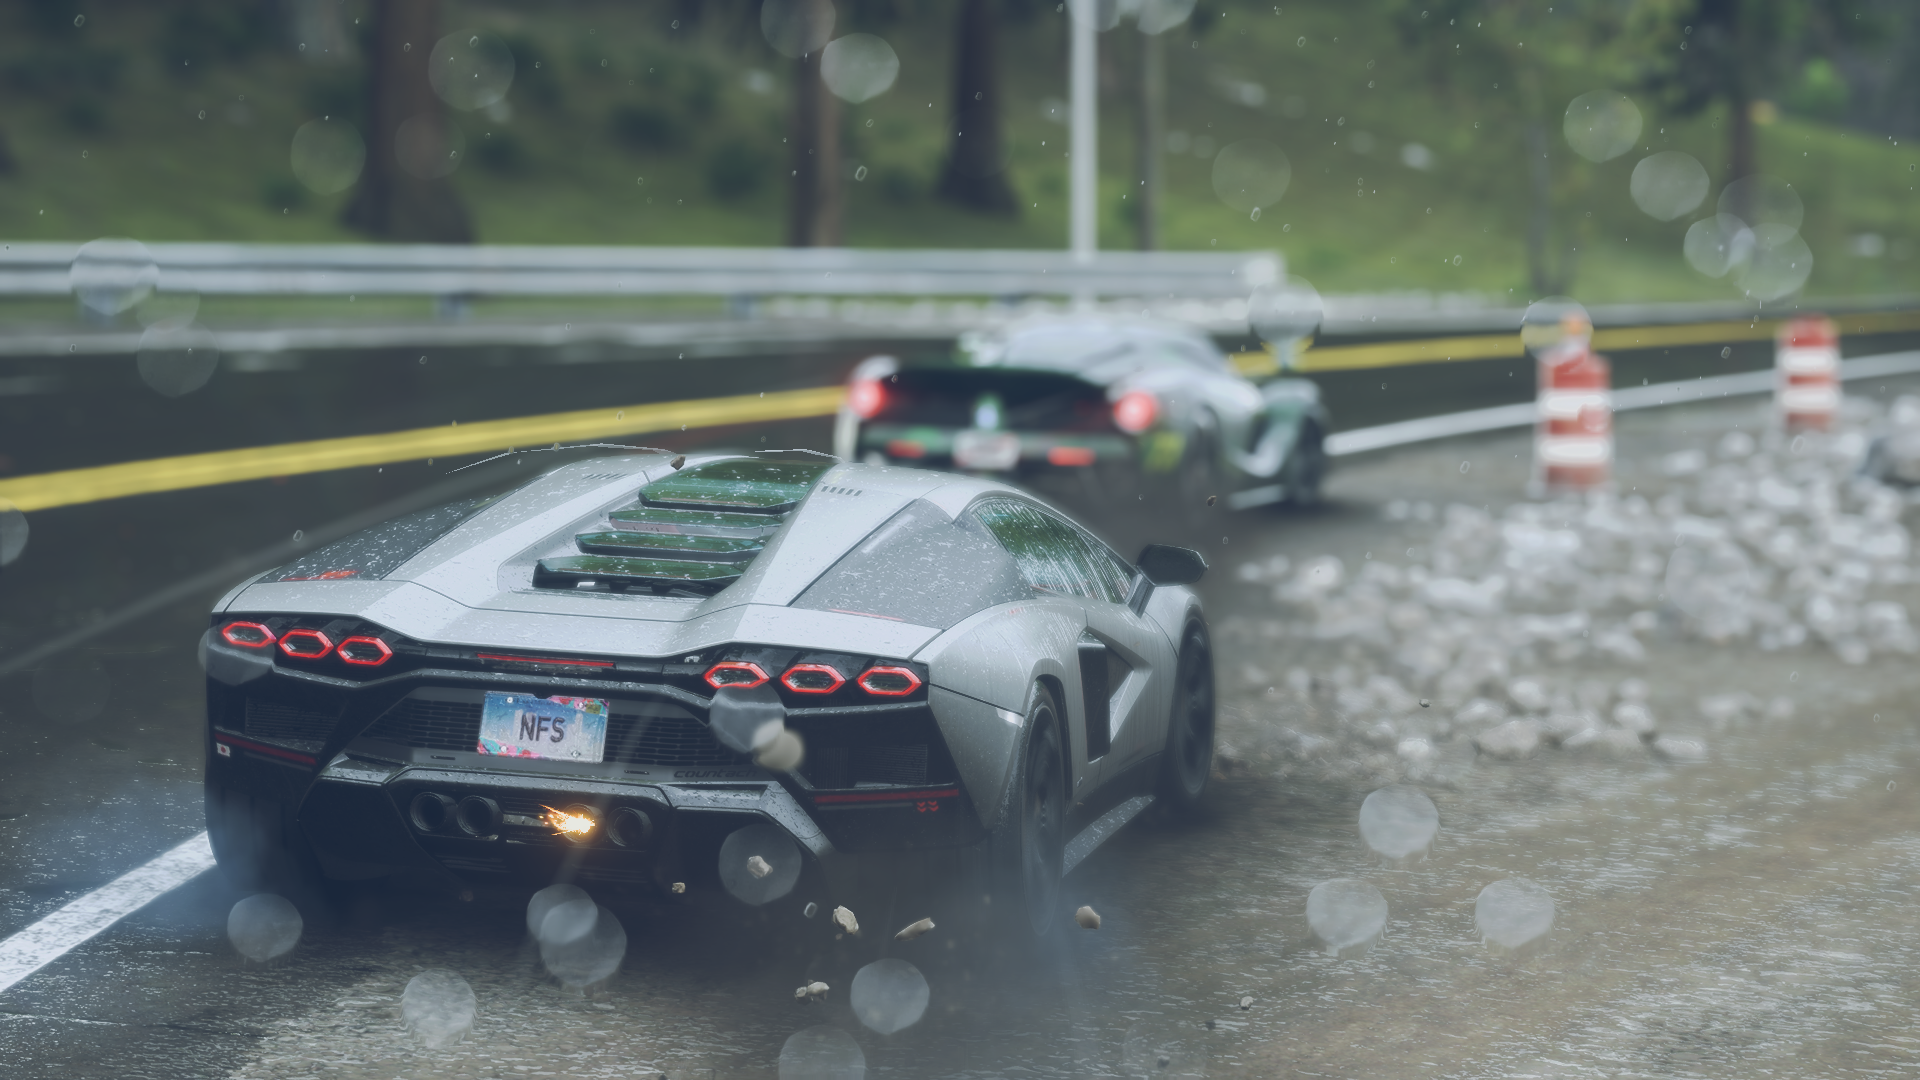 Need For Speed Car Video Games Licence Plates Street CGi Taillights Rain Rear View 1920x1080